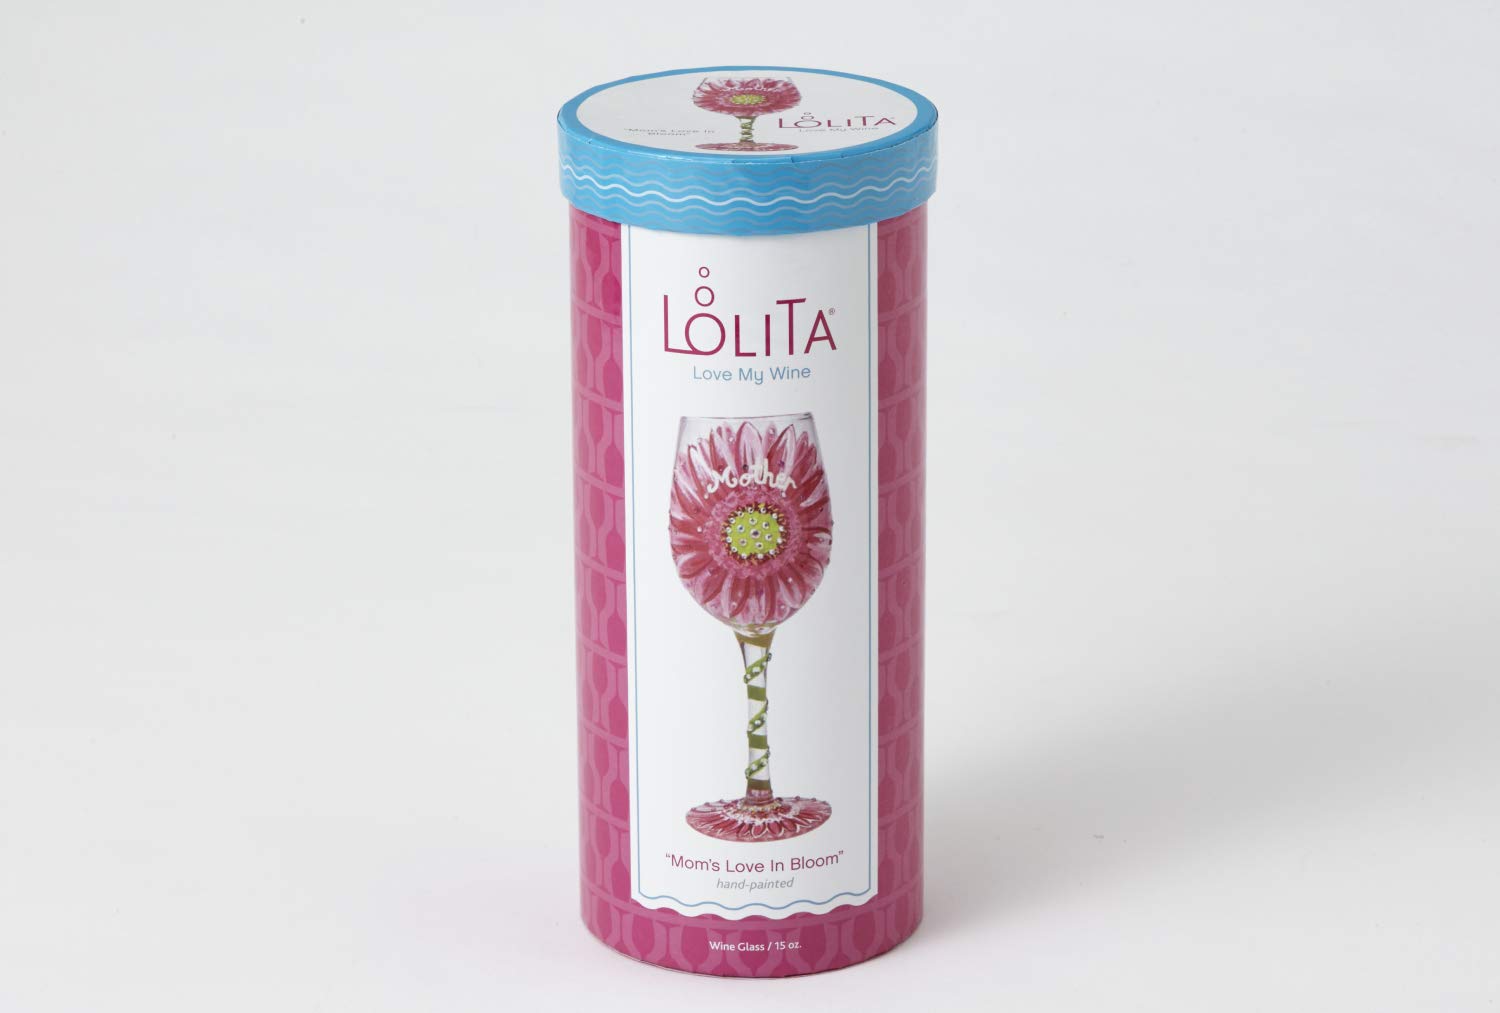 Designs by Lolita “Mom’s Love in Bloom” Hand-painted Artisan Wine Glass, 15 oz.